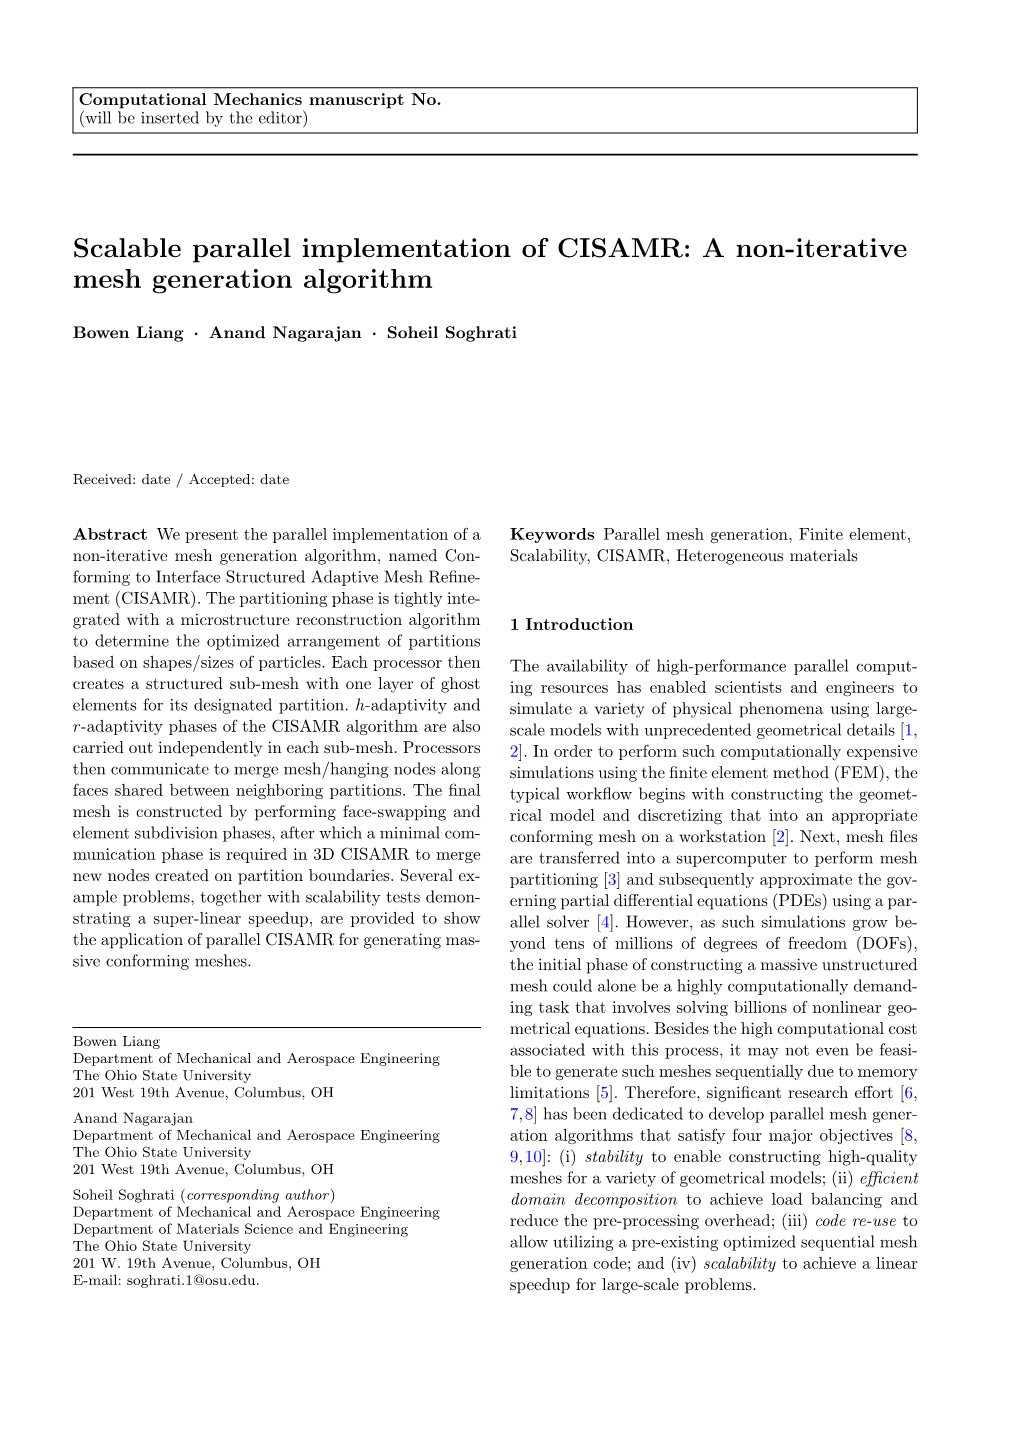 Scalable Parallel Implementation of CISAMR: a Non-Iterative Mesh Generation Algorithm